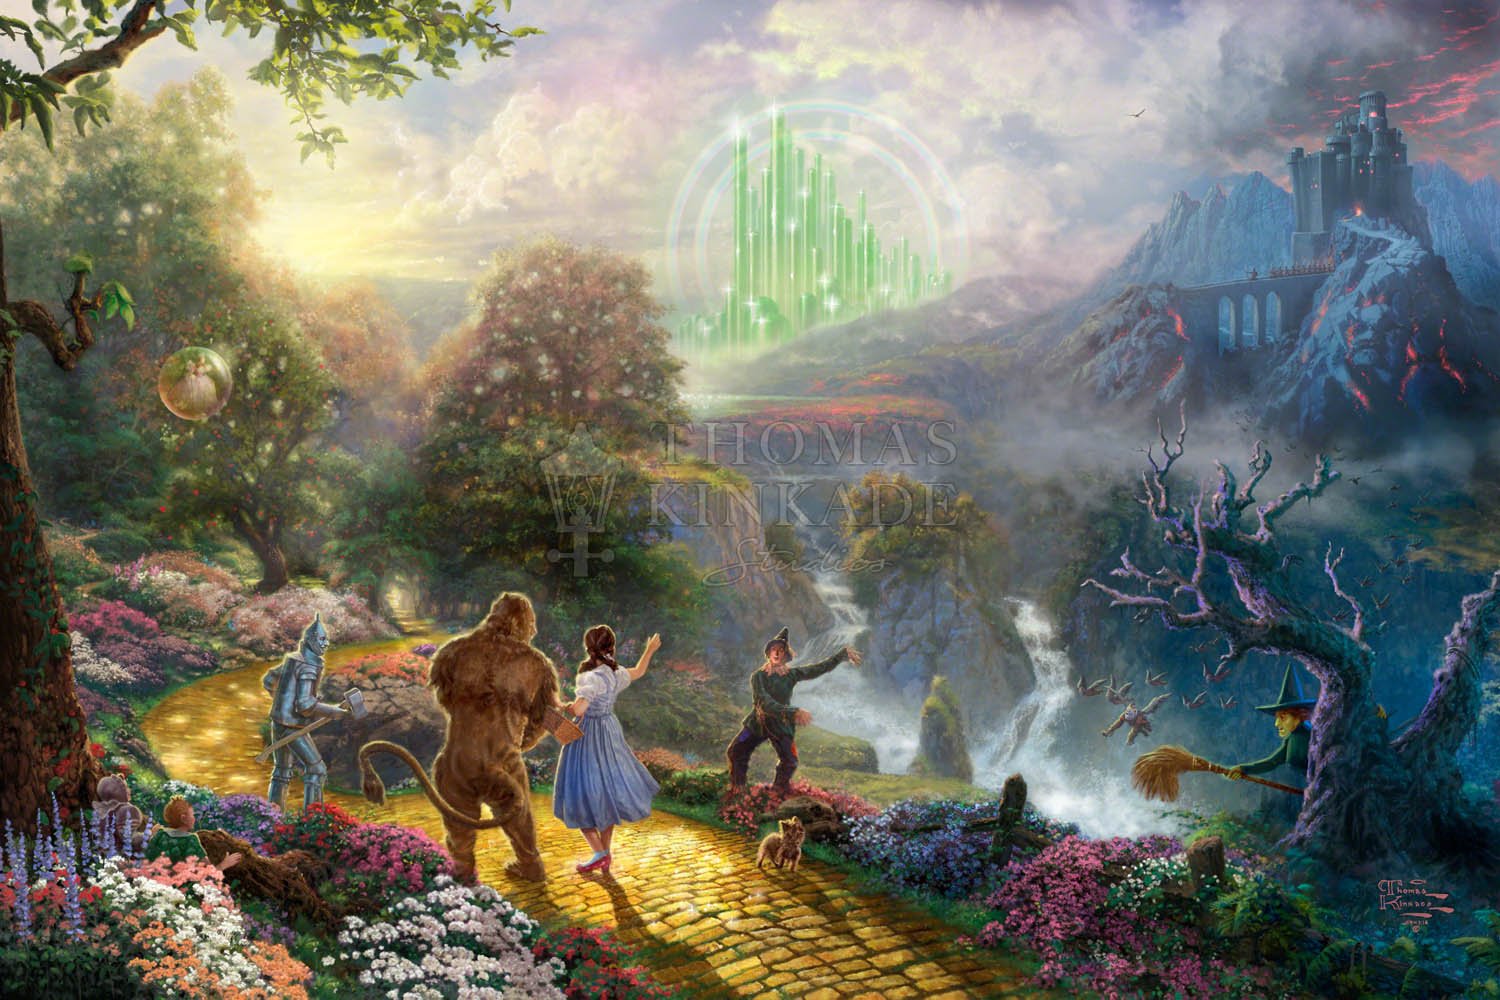 24 Trivia Quiz Questions & Answers From Museums To Superheroes Emerald City The Wizard of Oz